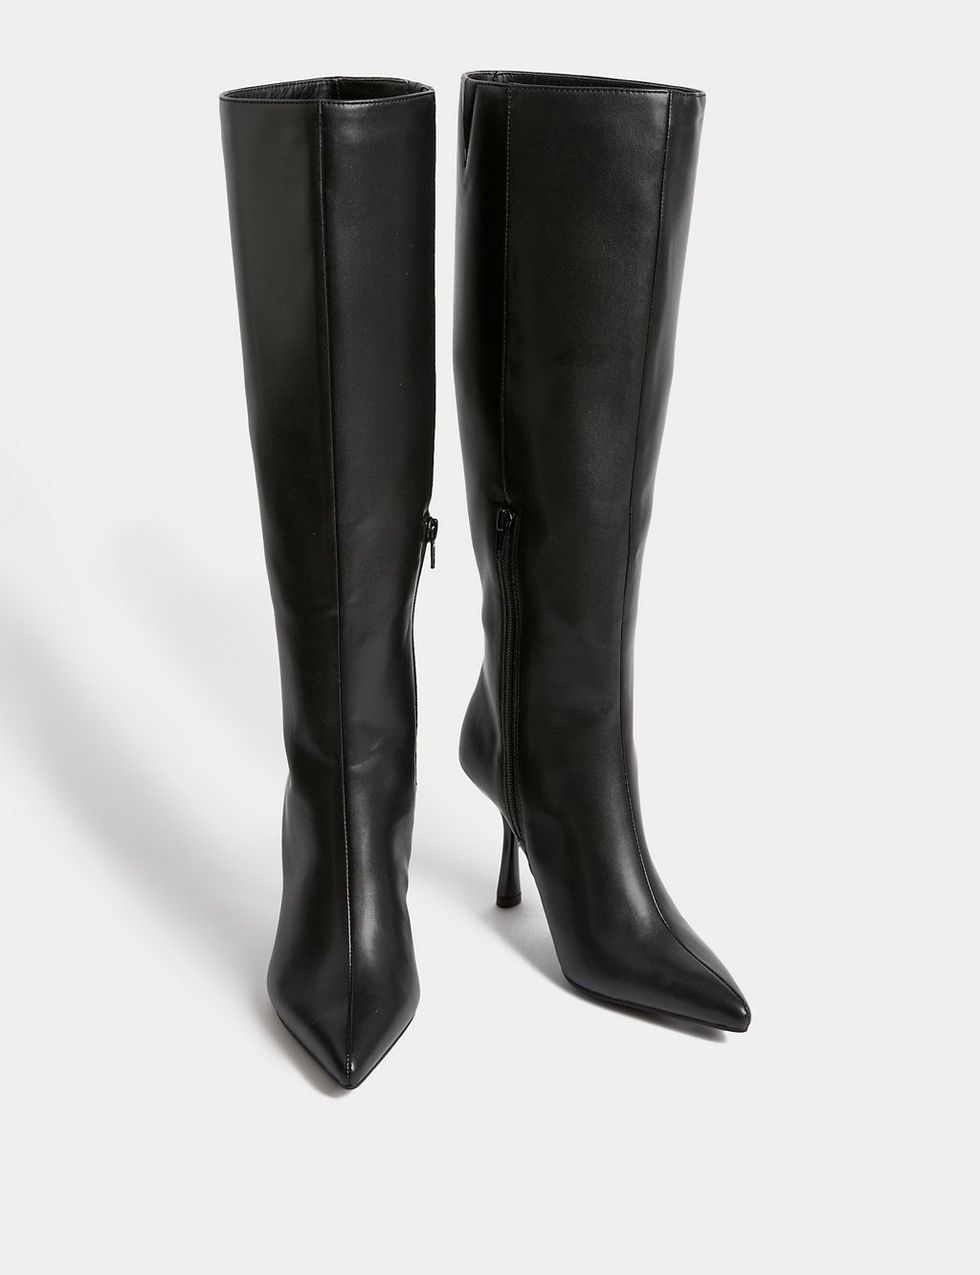 33 Knee High Boots To See You Through Autumn, Winter And Beyond